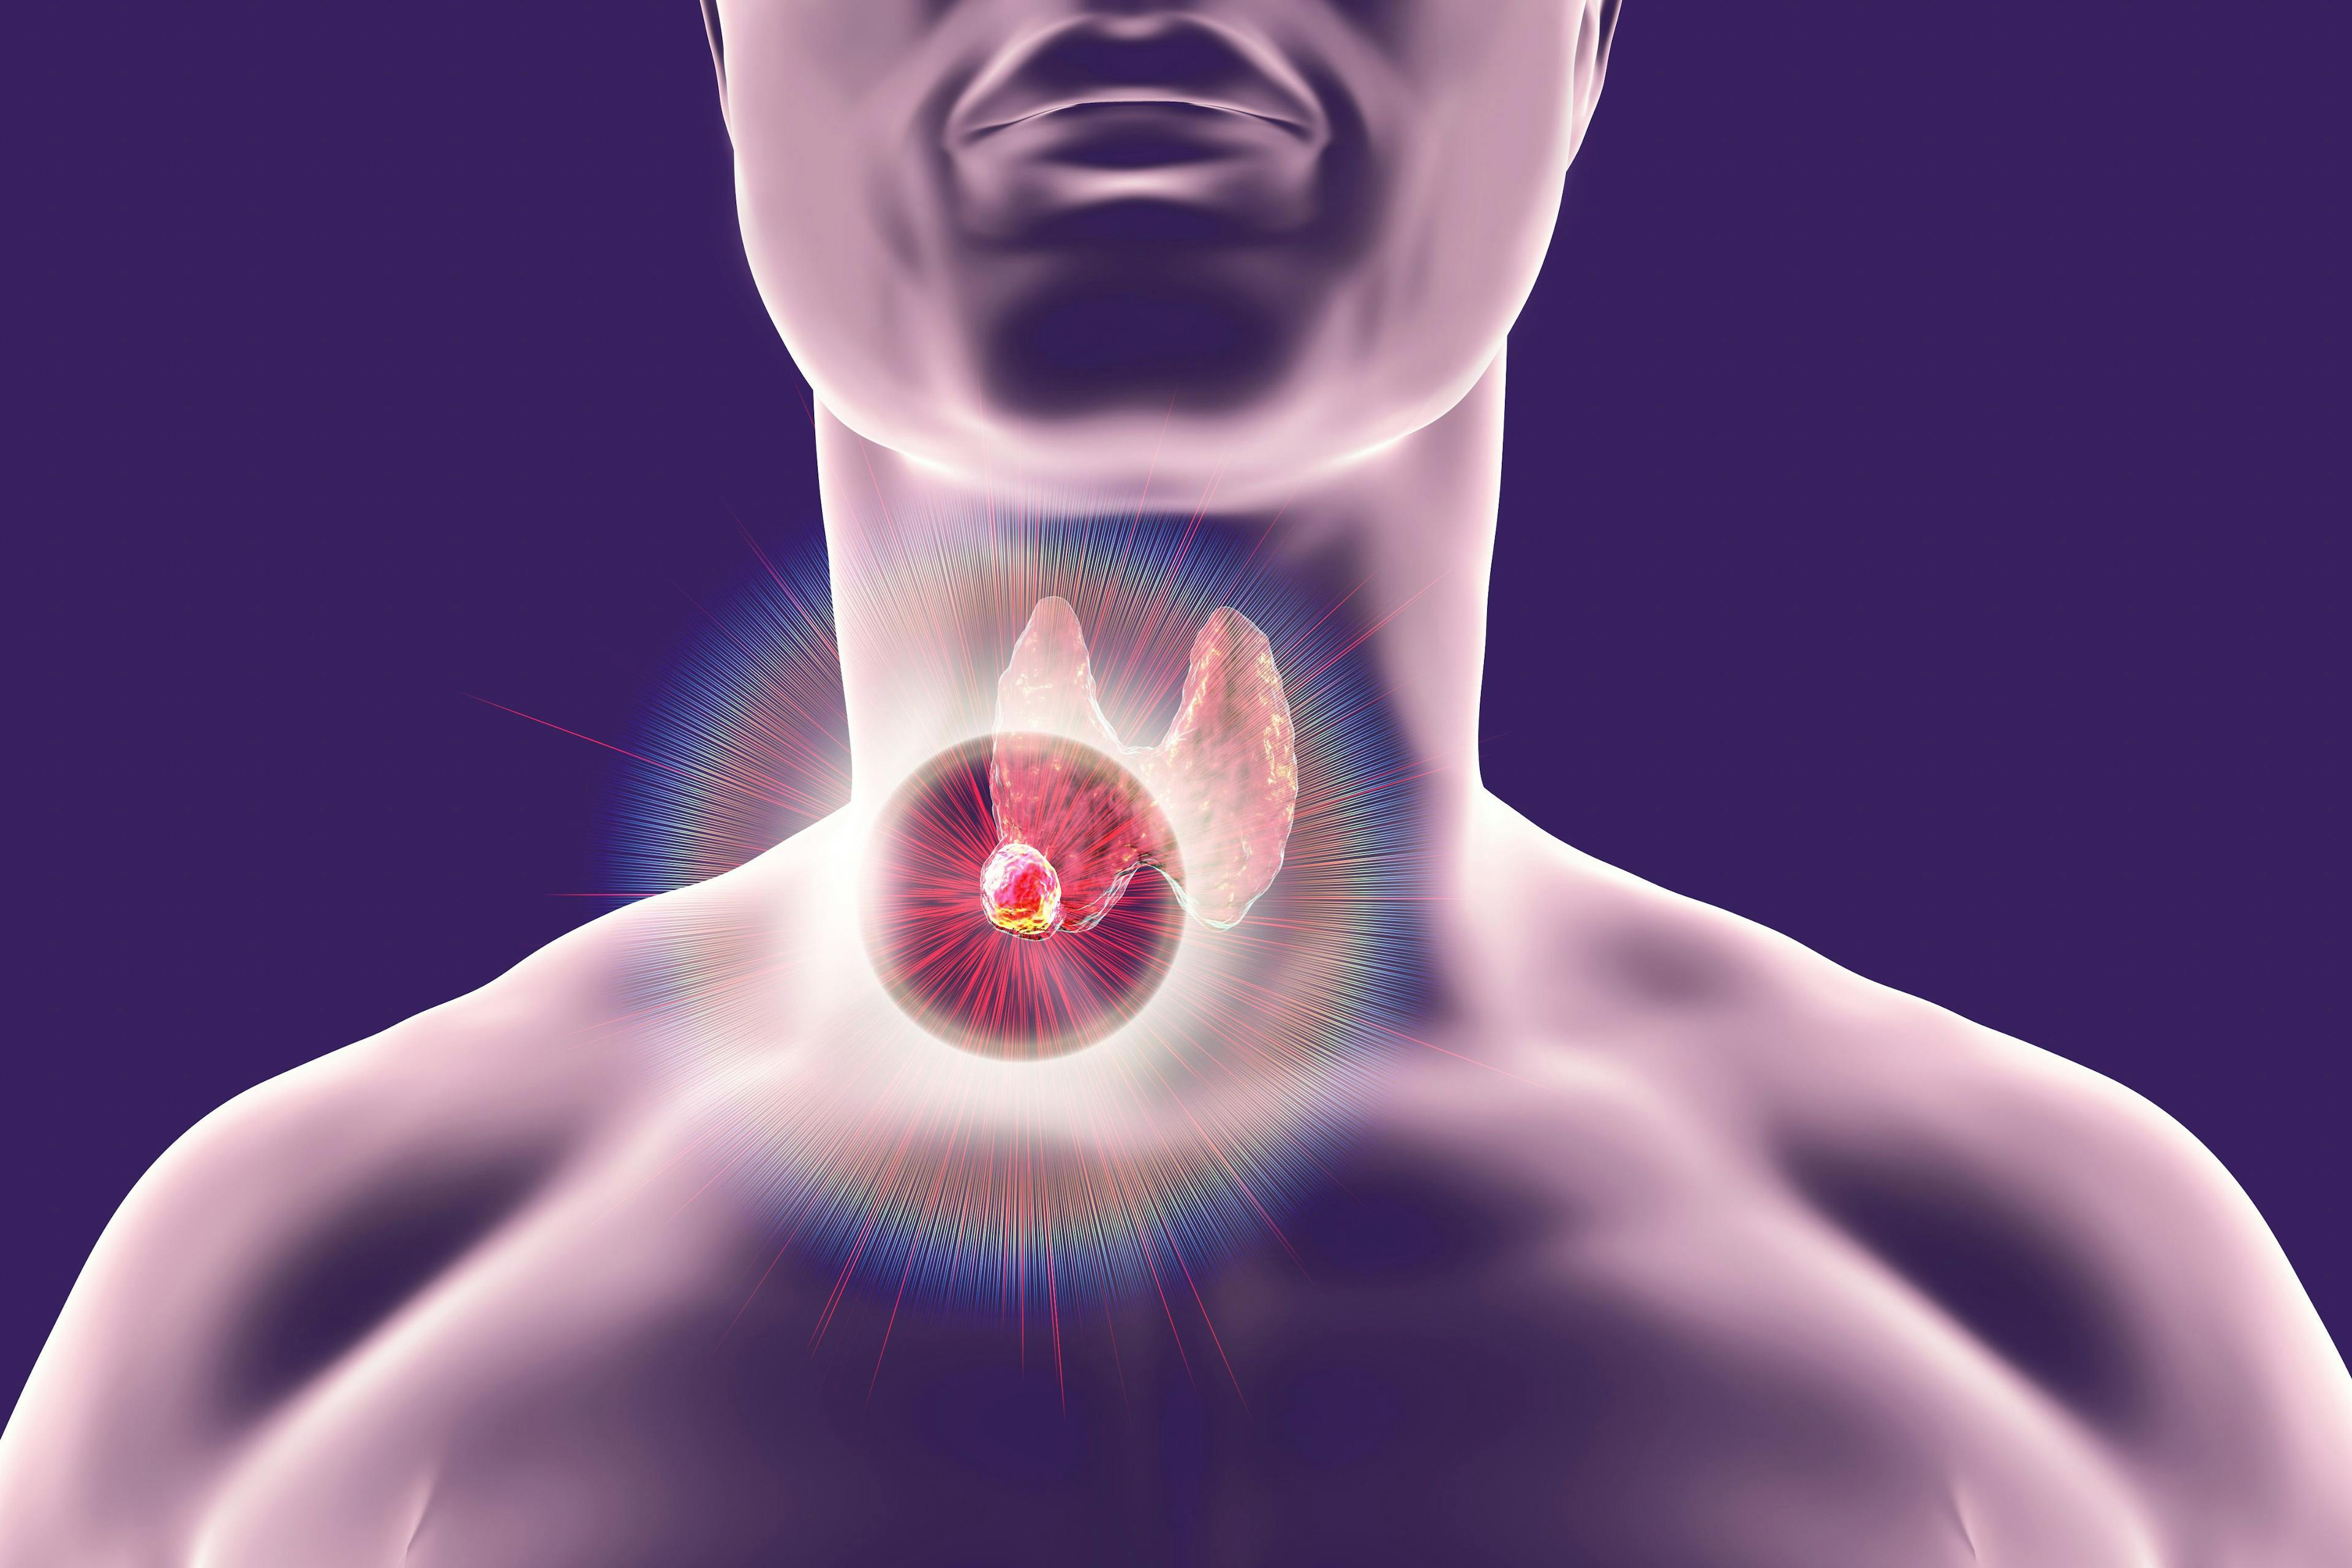 FDA Approves Pralsetinib to Treat RET-Altered Thyroid Cancers